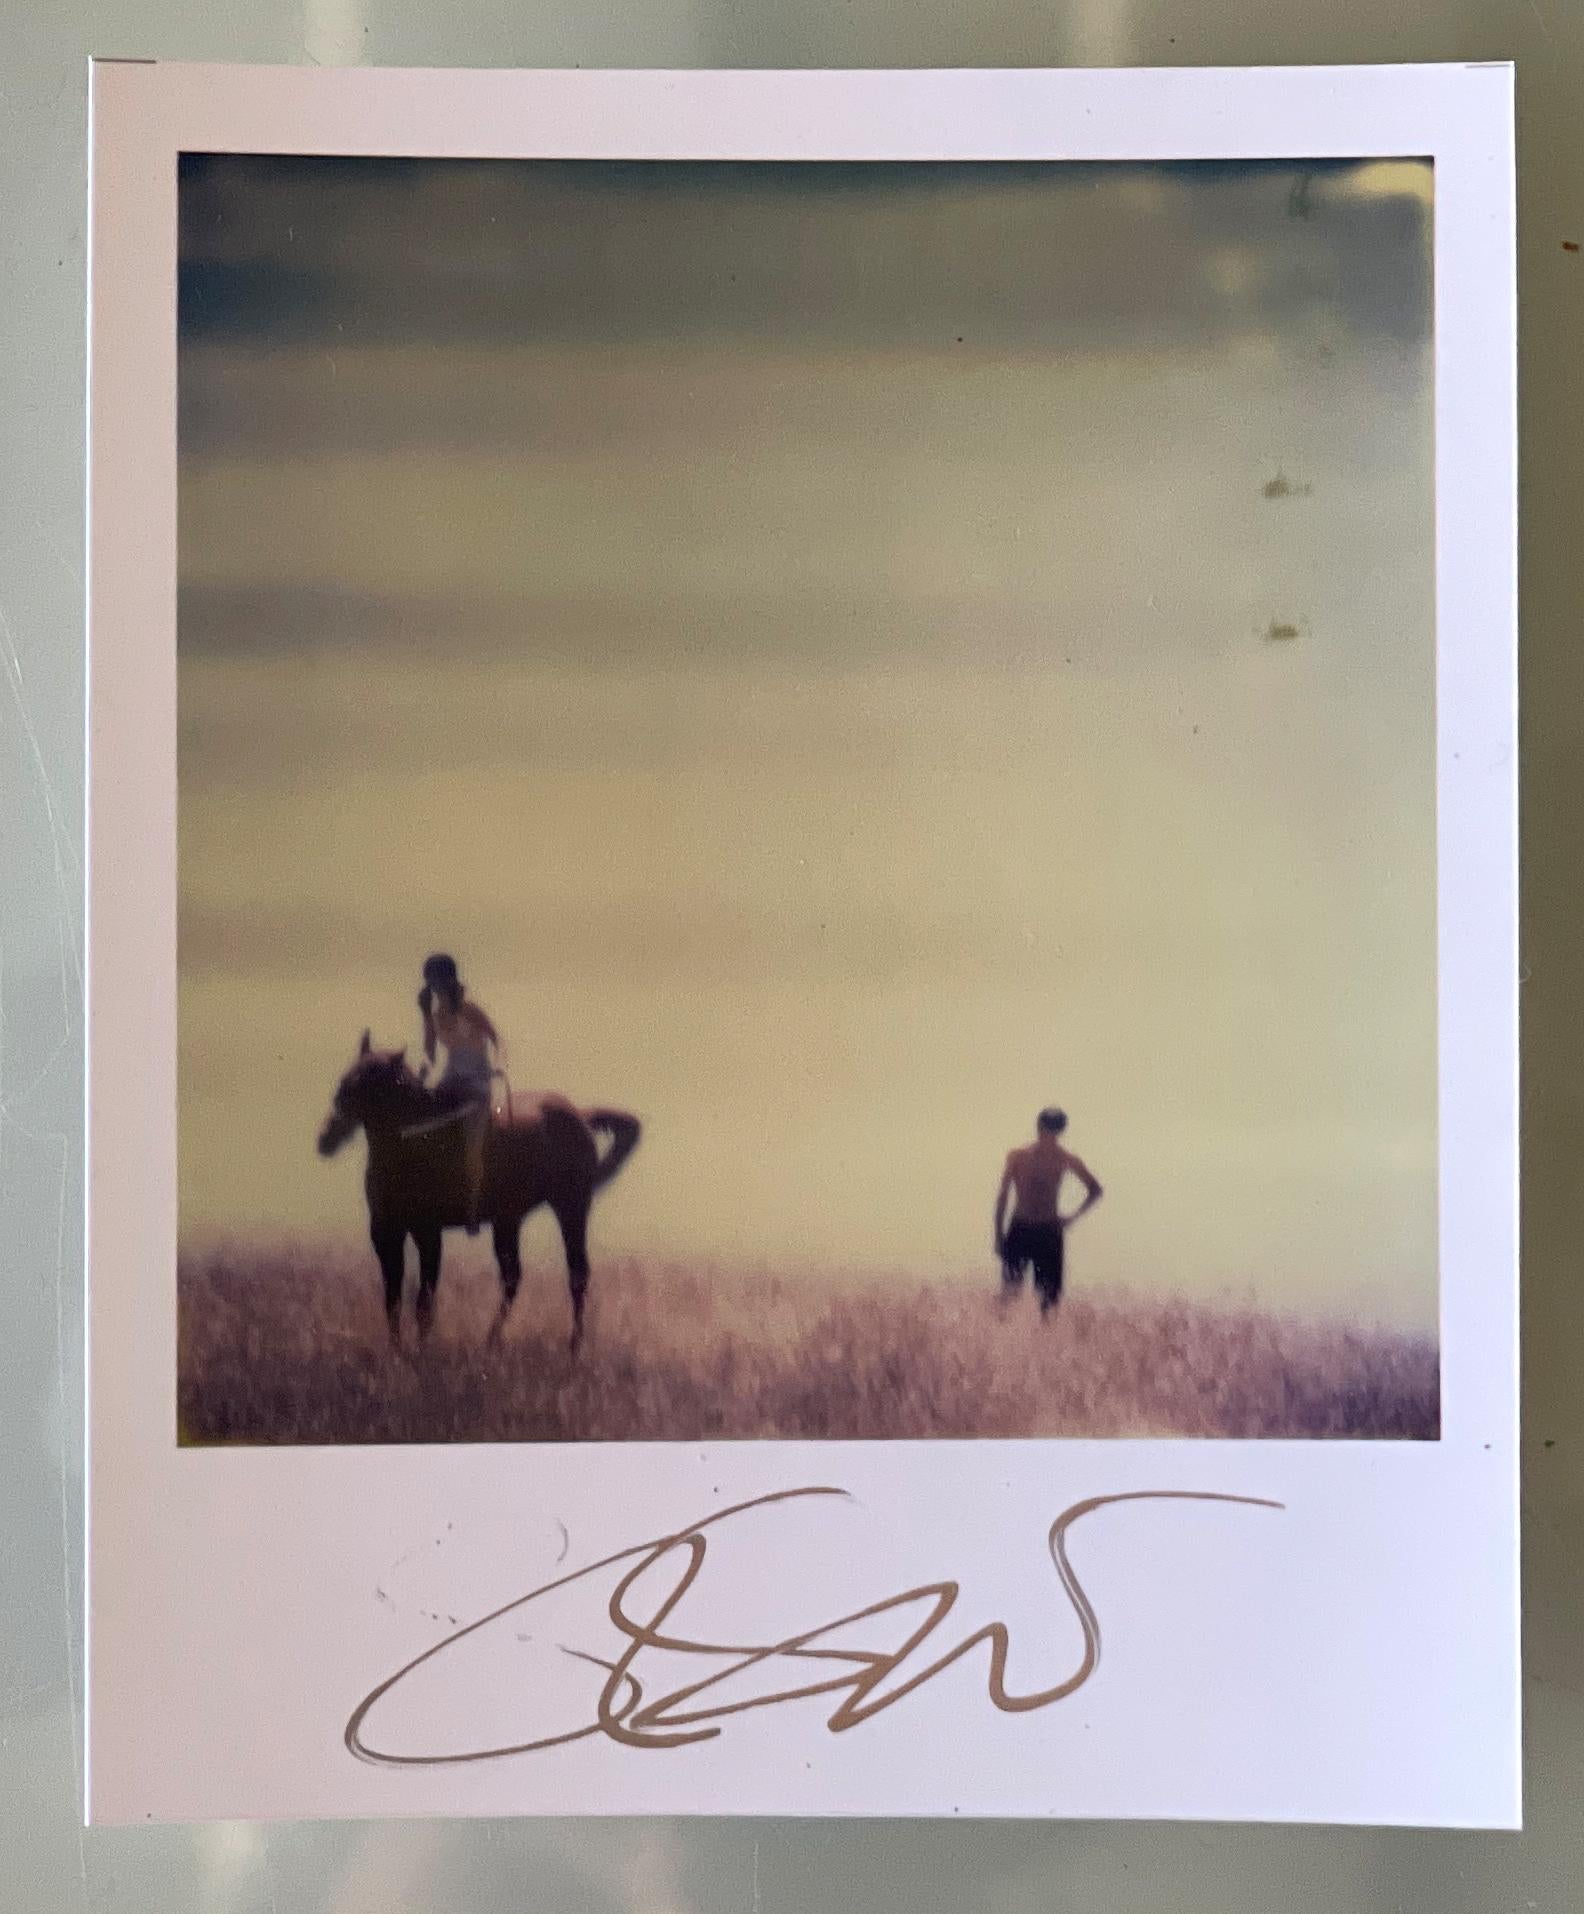 Stefanie Schneider's Mini
Renée's Dream XV (Days of Heaven) - 2006

signed in front, not mounted.
Digital Color Photographs based on a Polaroid.

Polaroid sized open Editions 1999-2023
10.7 x 8.8cm (Image 7.9x7.7cm)
